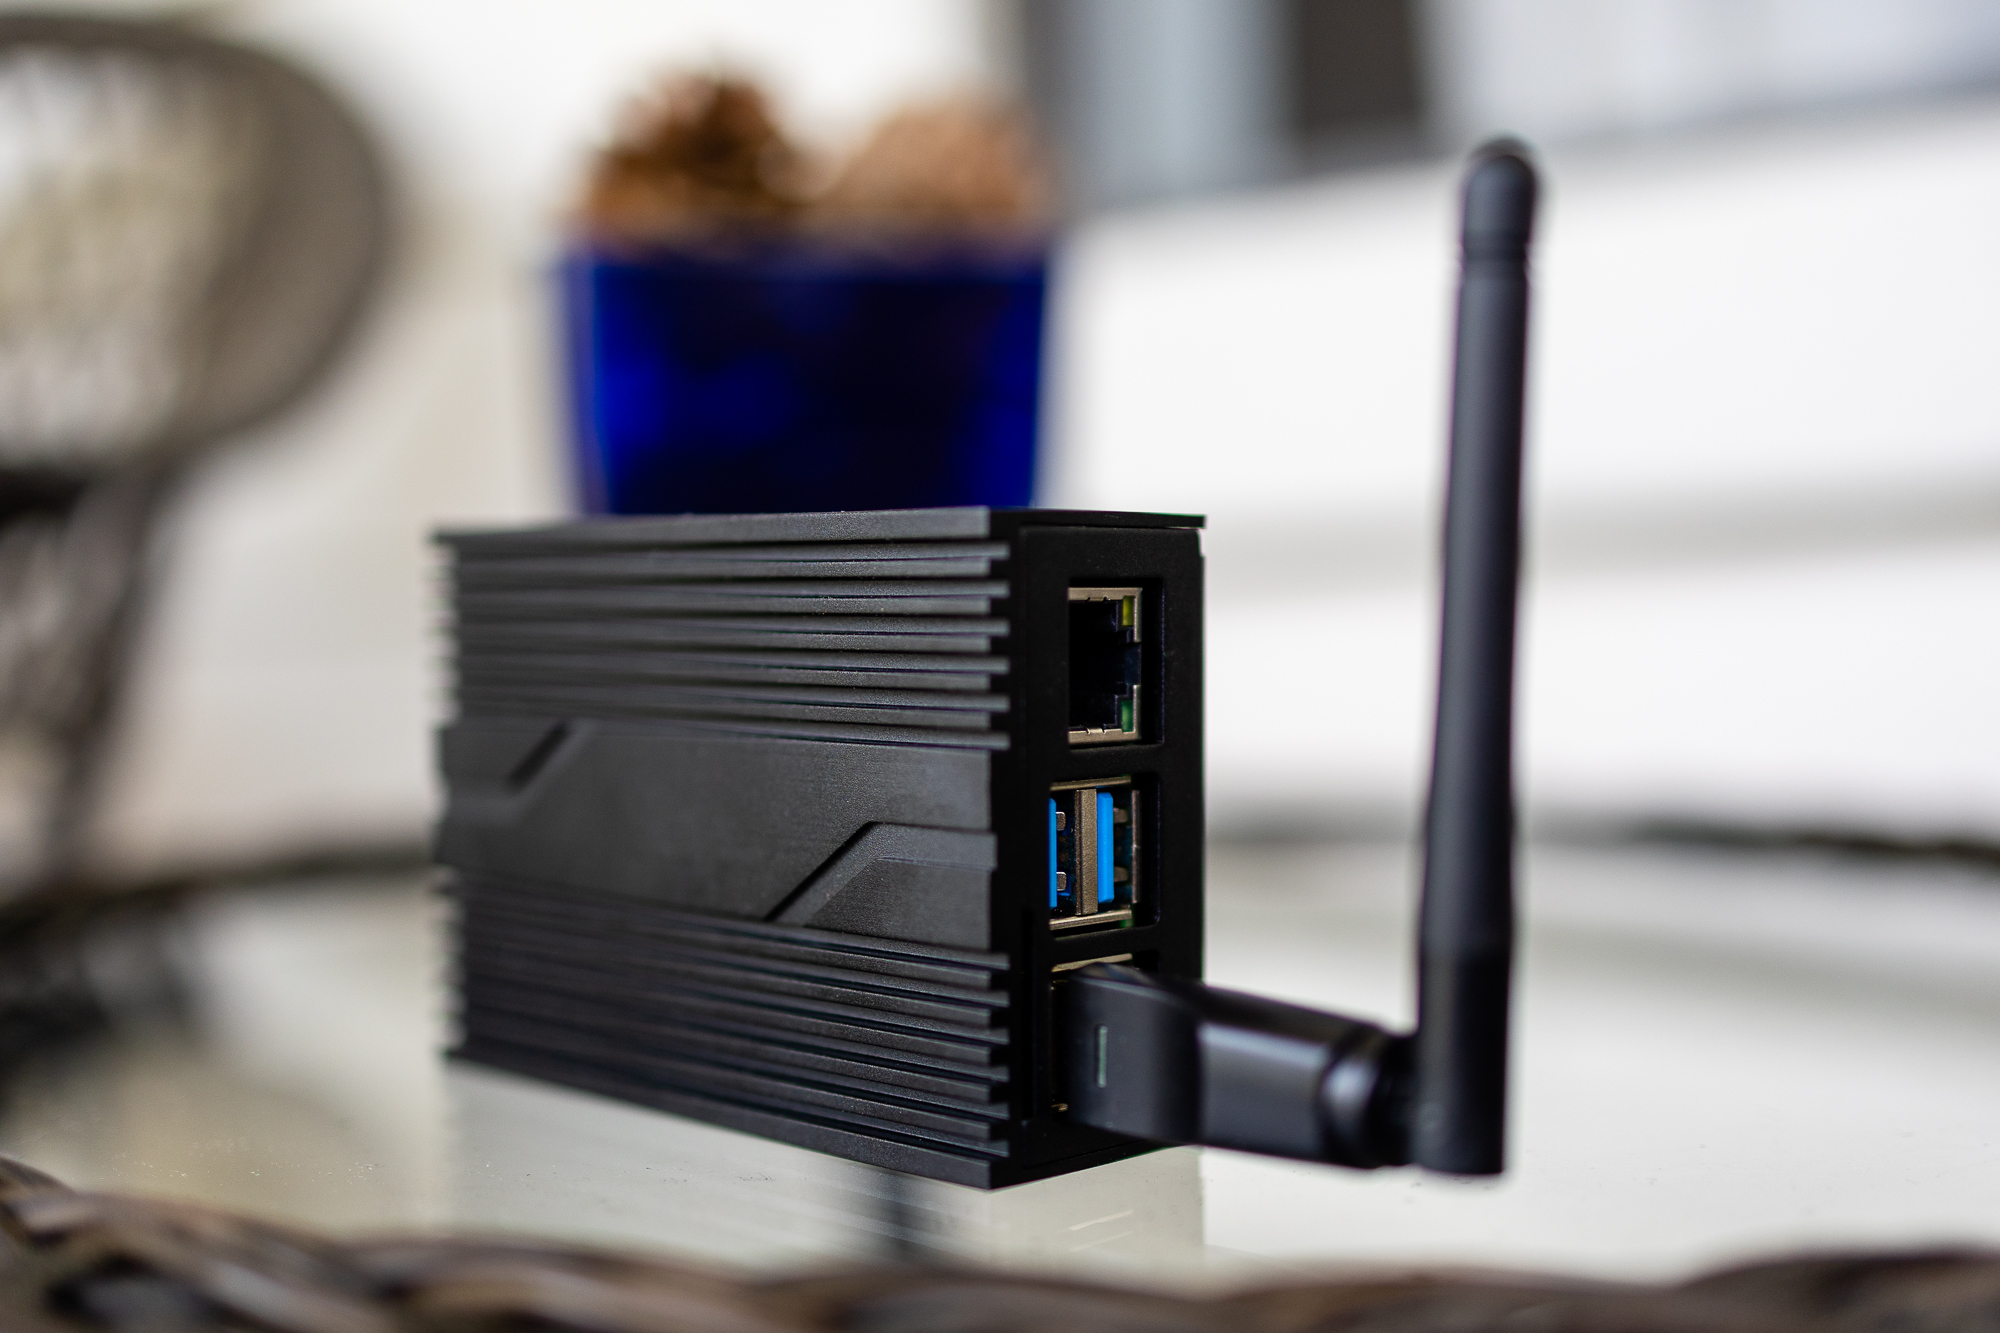 How I repurposed an Raspberry Pi into a travel router | Trends